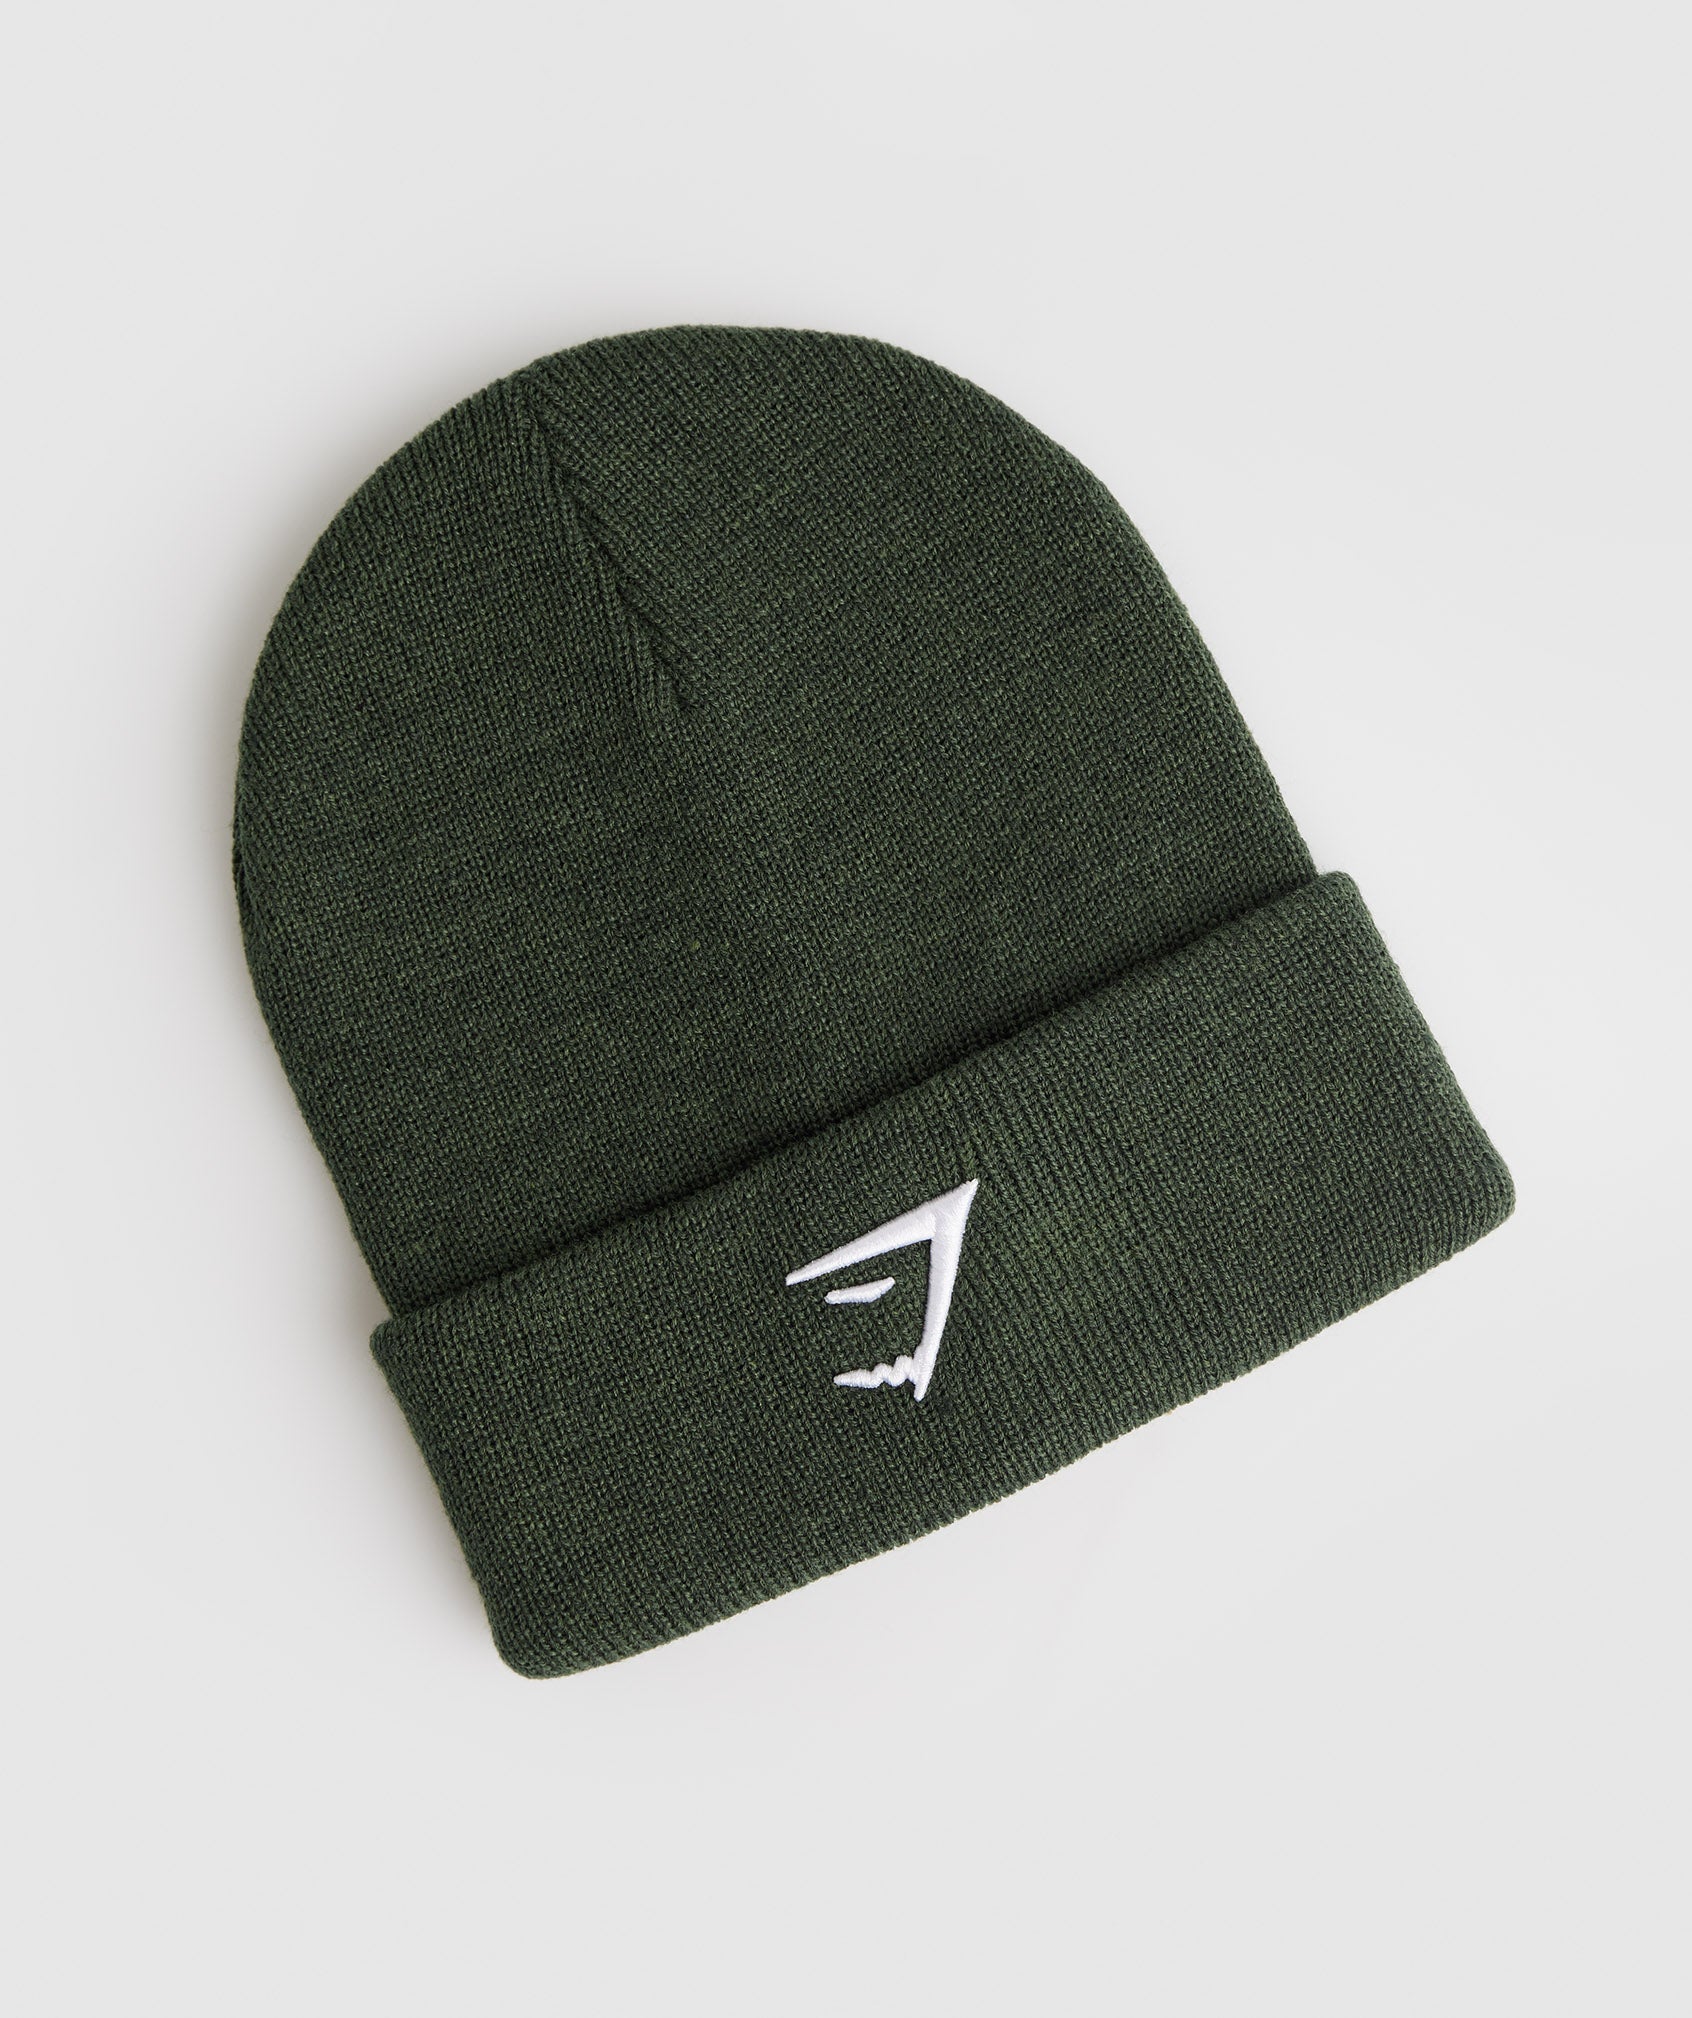 Sharkhead Beanie in Moss Olive - view 1